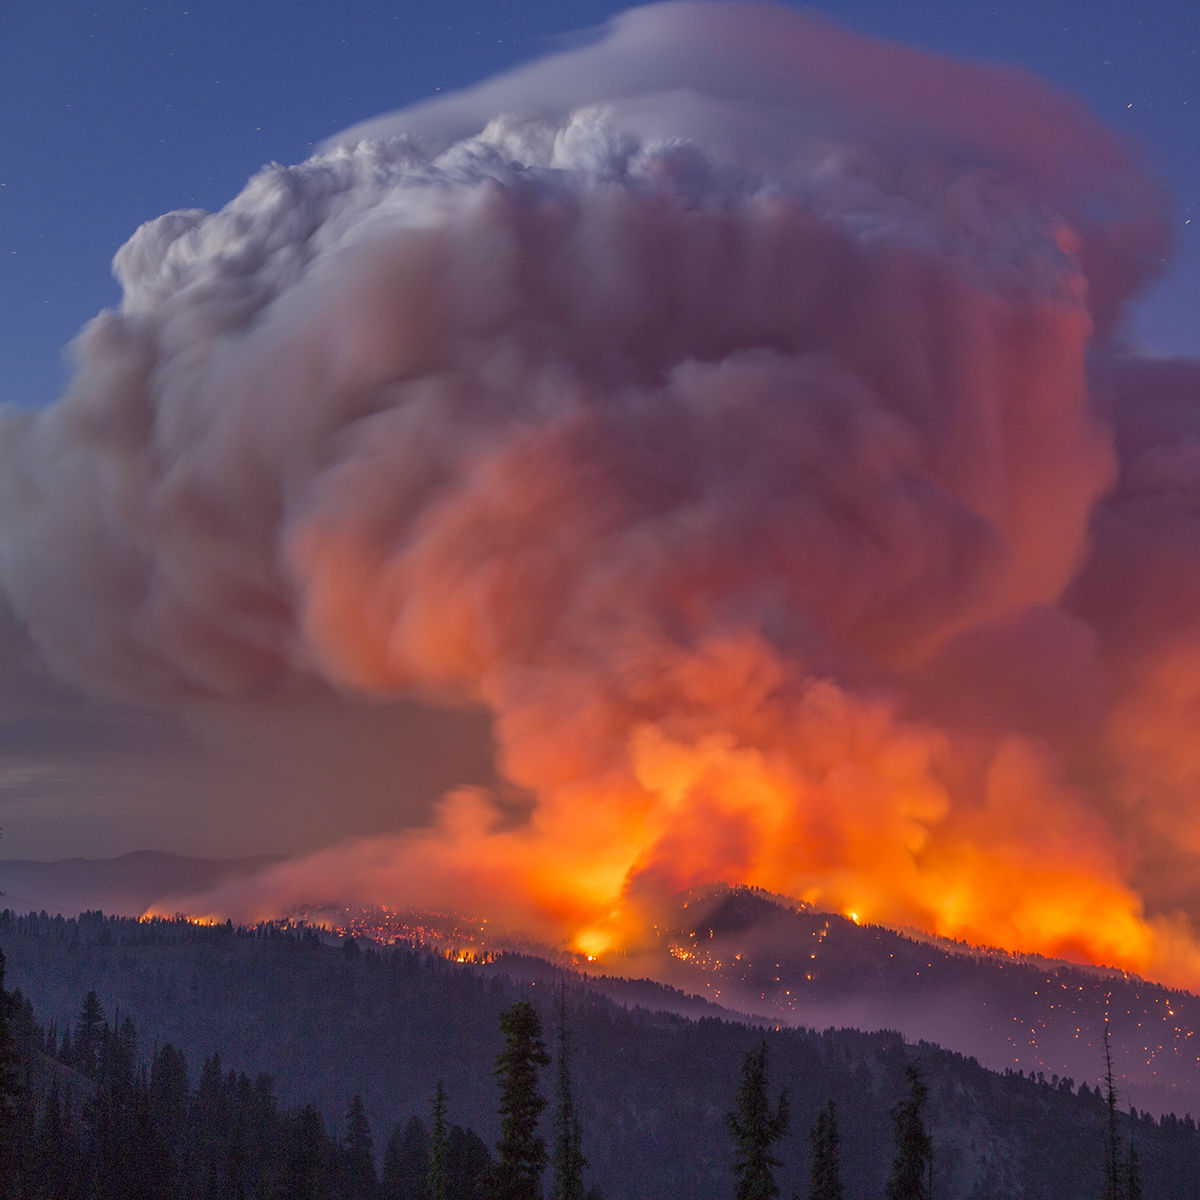 A column of smoke rises from a mountain on fire.